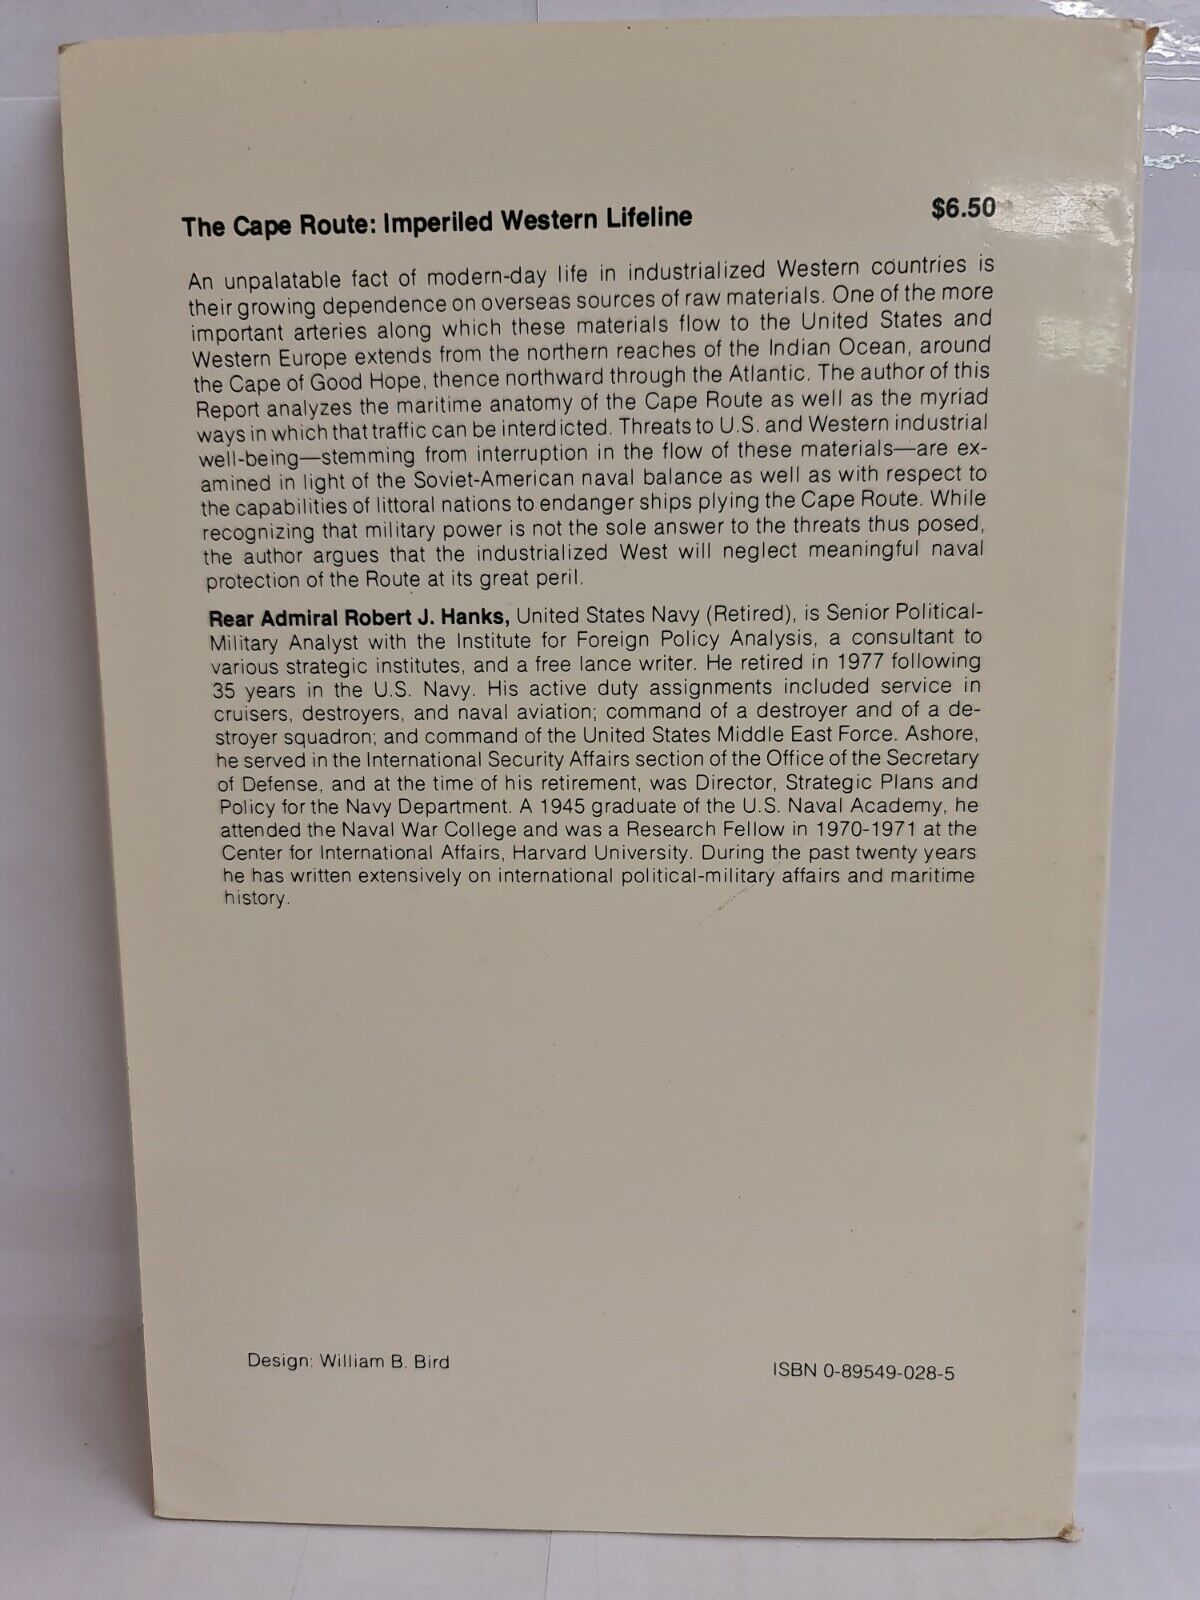 The Cape Route: Imperiled Western Lifeline by Robert Hanks (1981)